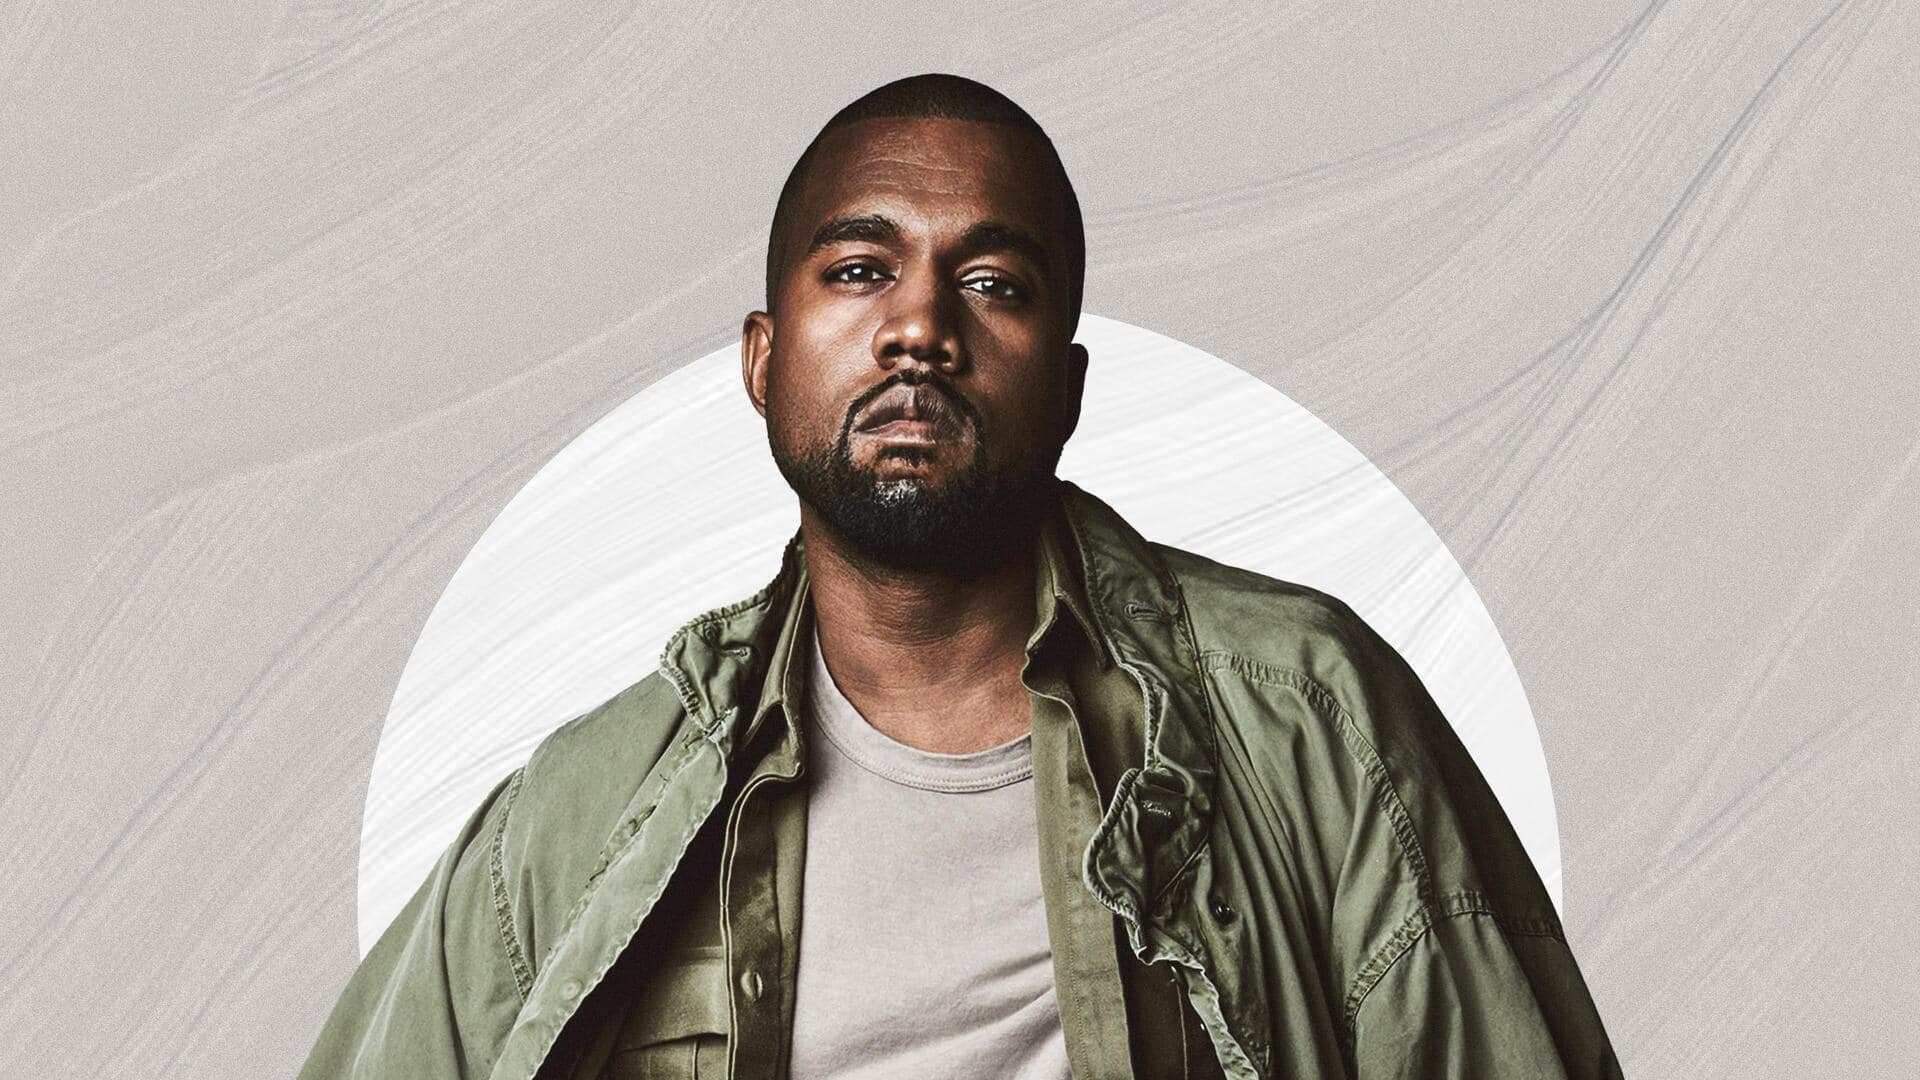 Journalist indicted for leaking antisemitic Kanye West rant